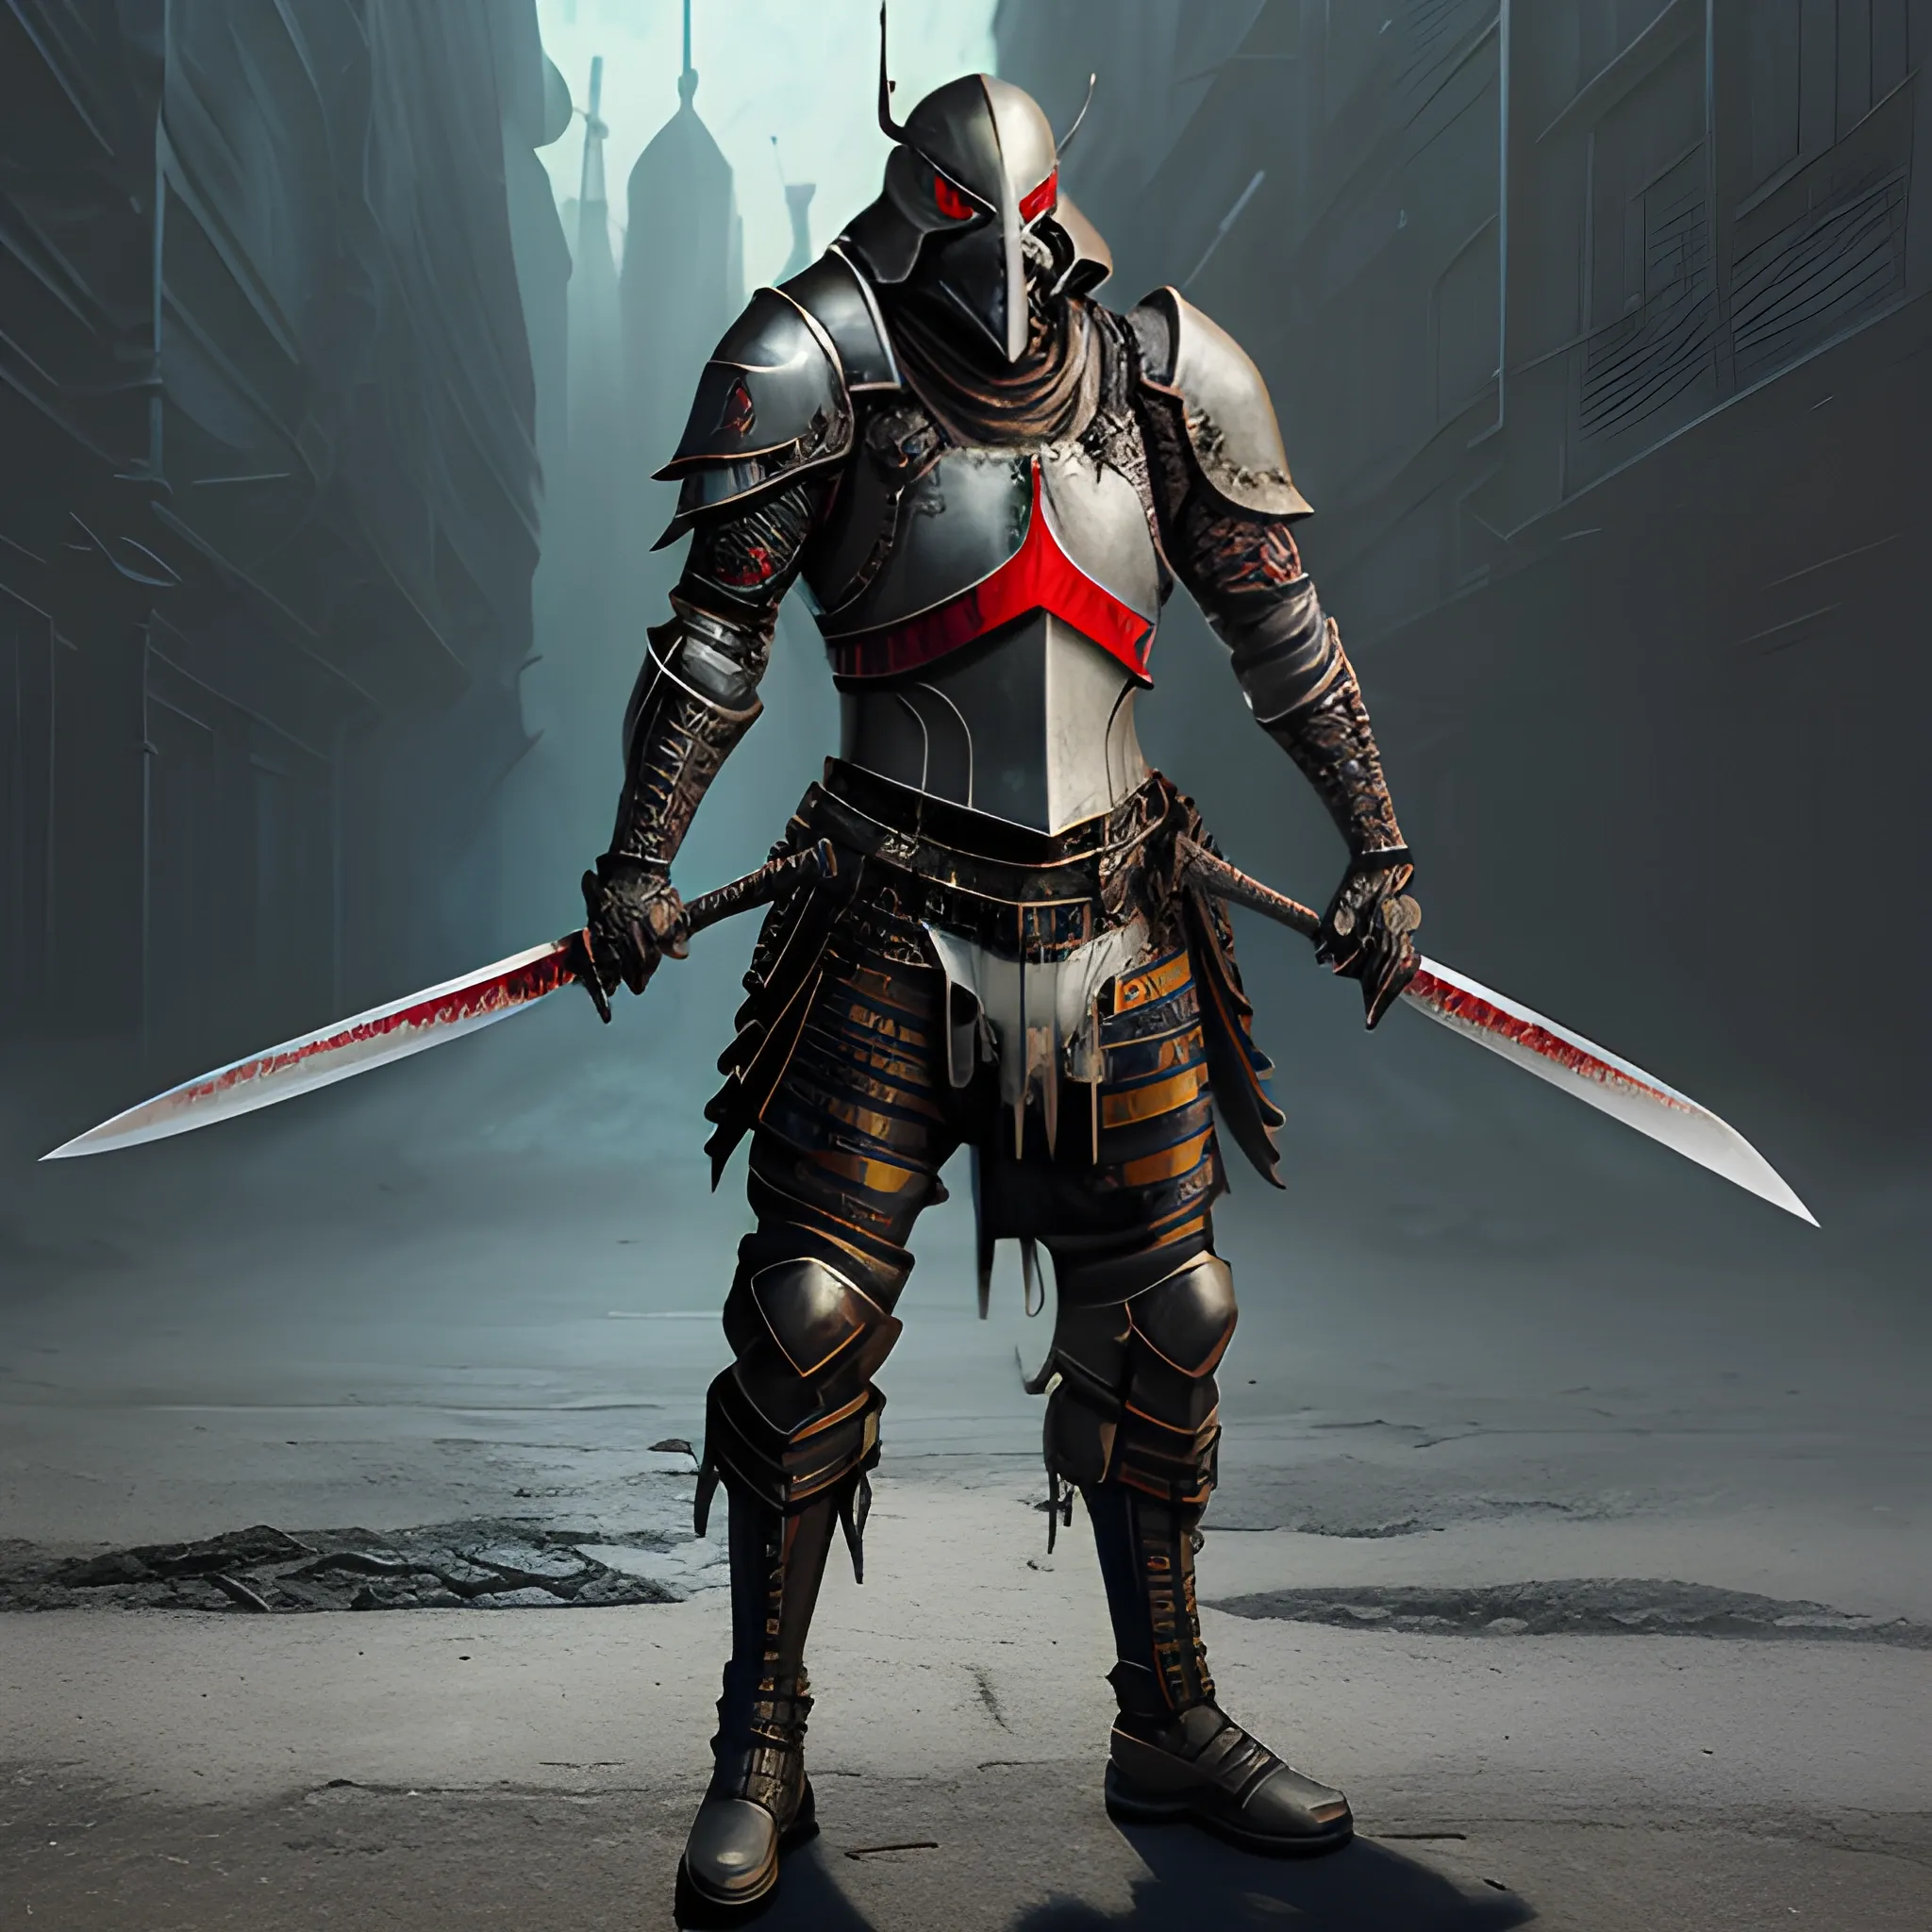 evil masked mercenary
 slim Armor, bloody sword, Super 
Futuristic, 8k, high resolution, high quality, photorealistic, hyperealistic, detailed, detailed matte painting, deep color, fantastical, intricate detail, splash screen, complementary colors, fantasy concept art, full body, standing menacingly
 